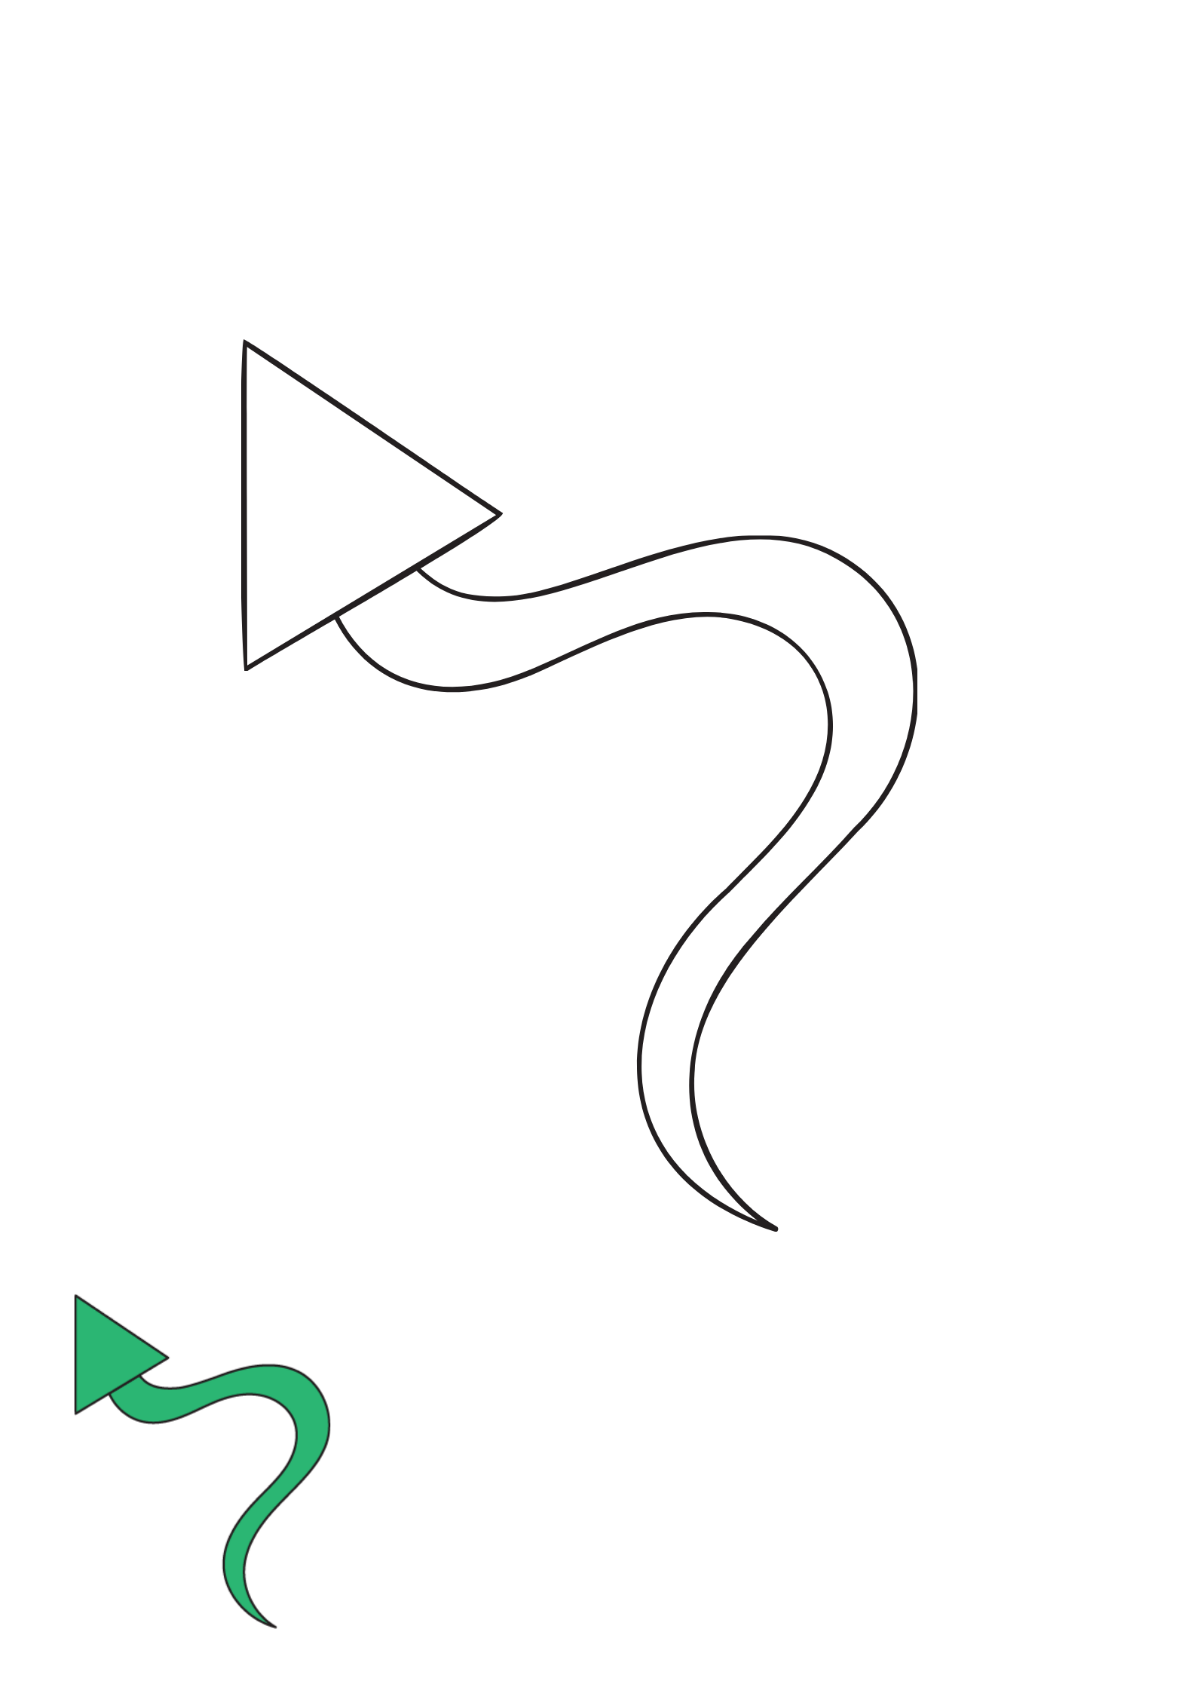 Green Curved Arrow Coloring Page Template